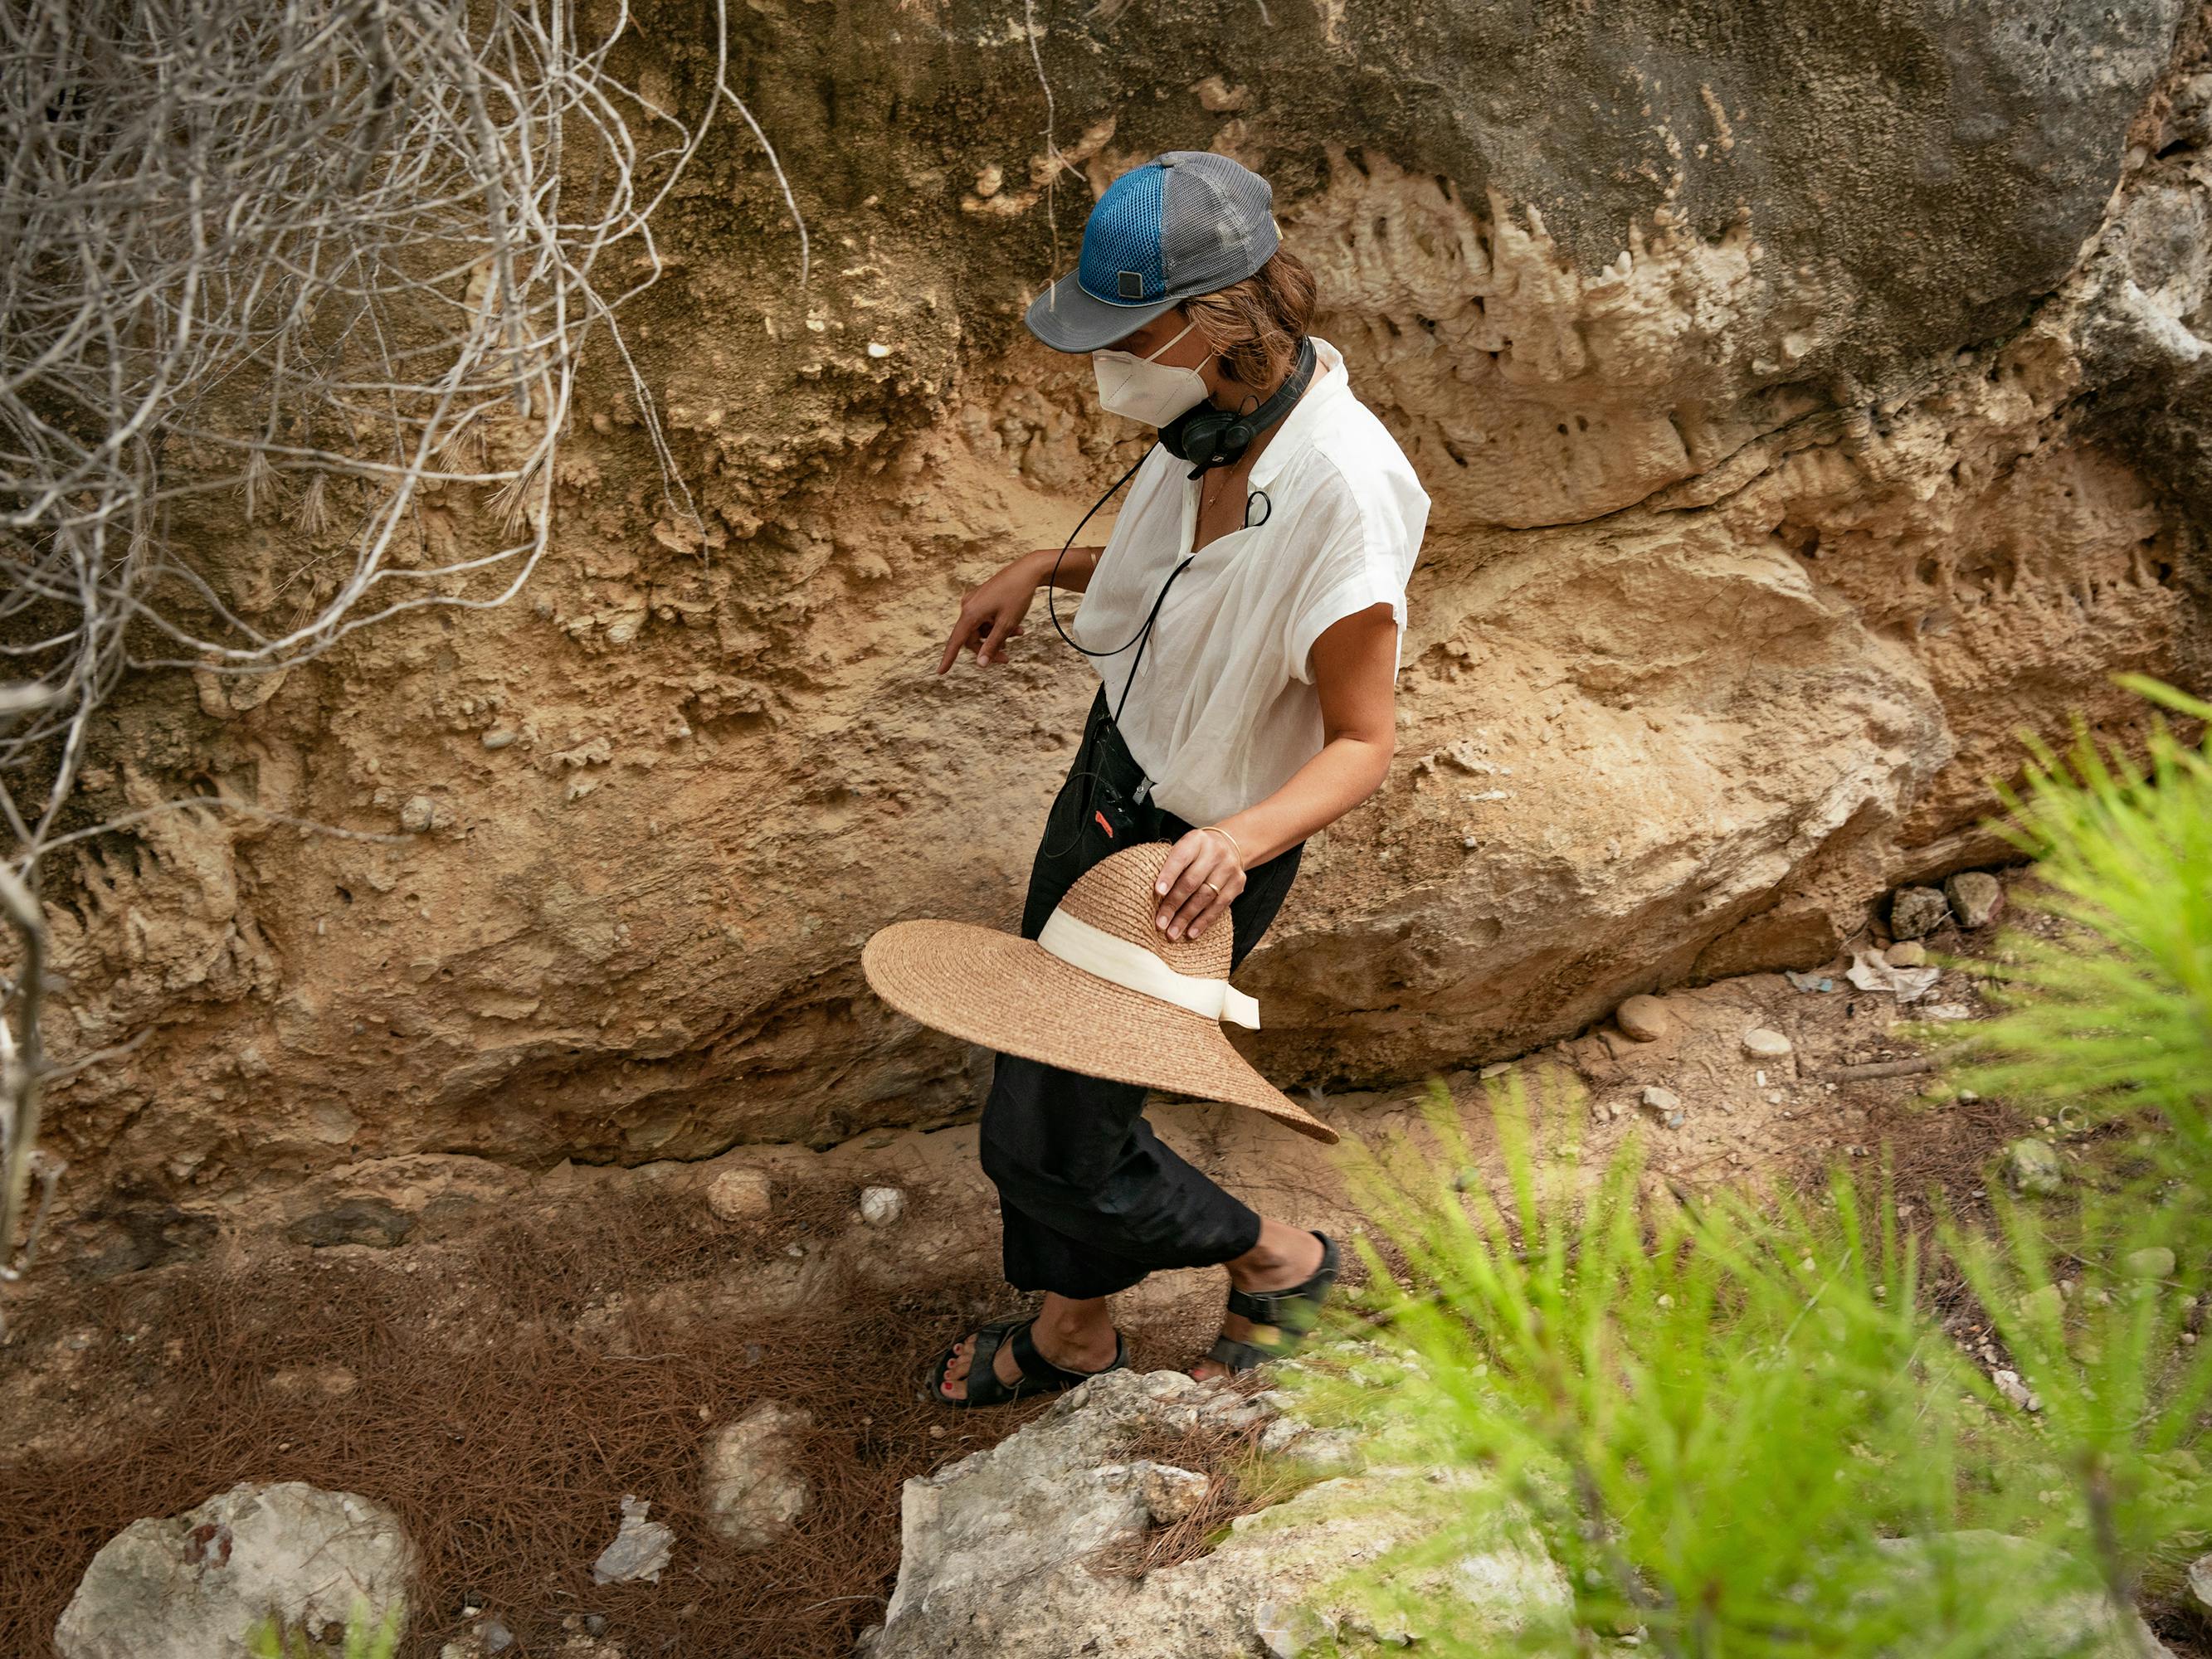 Maggie Gyllenhaal wears dark pants, dark sandals, a white shirt, a blue-and-gray hat, and carries a wide-brimmed straw hat with a white ribbon. She walks down a muddy path lined with lime green bushes.